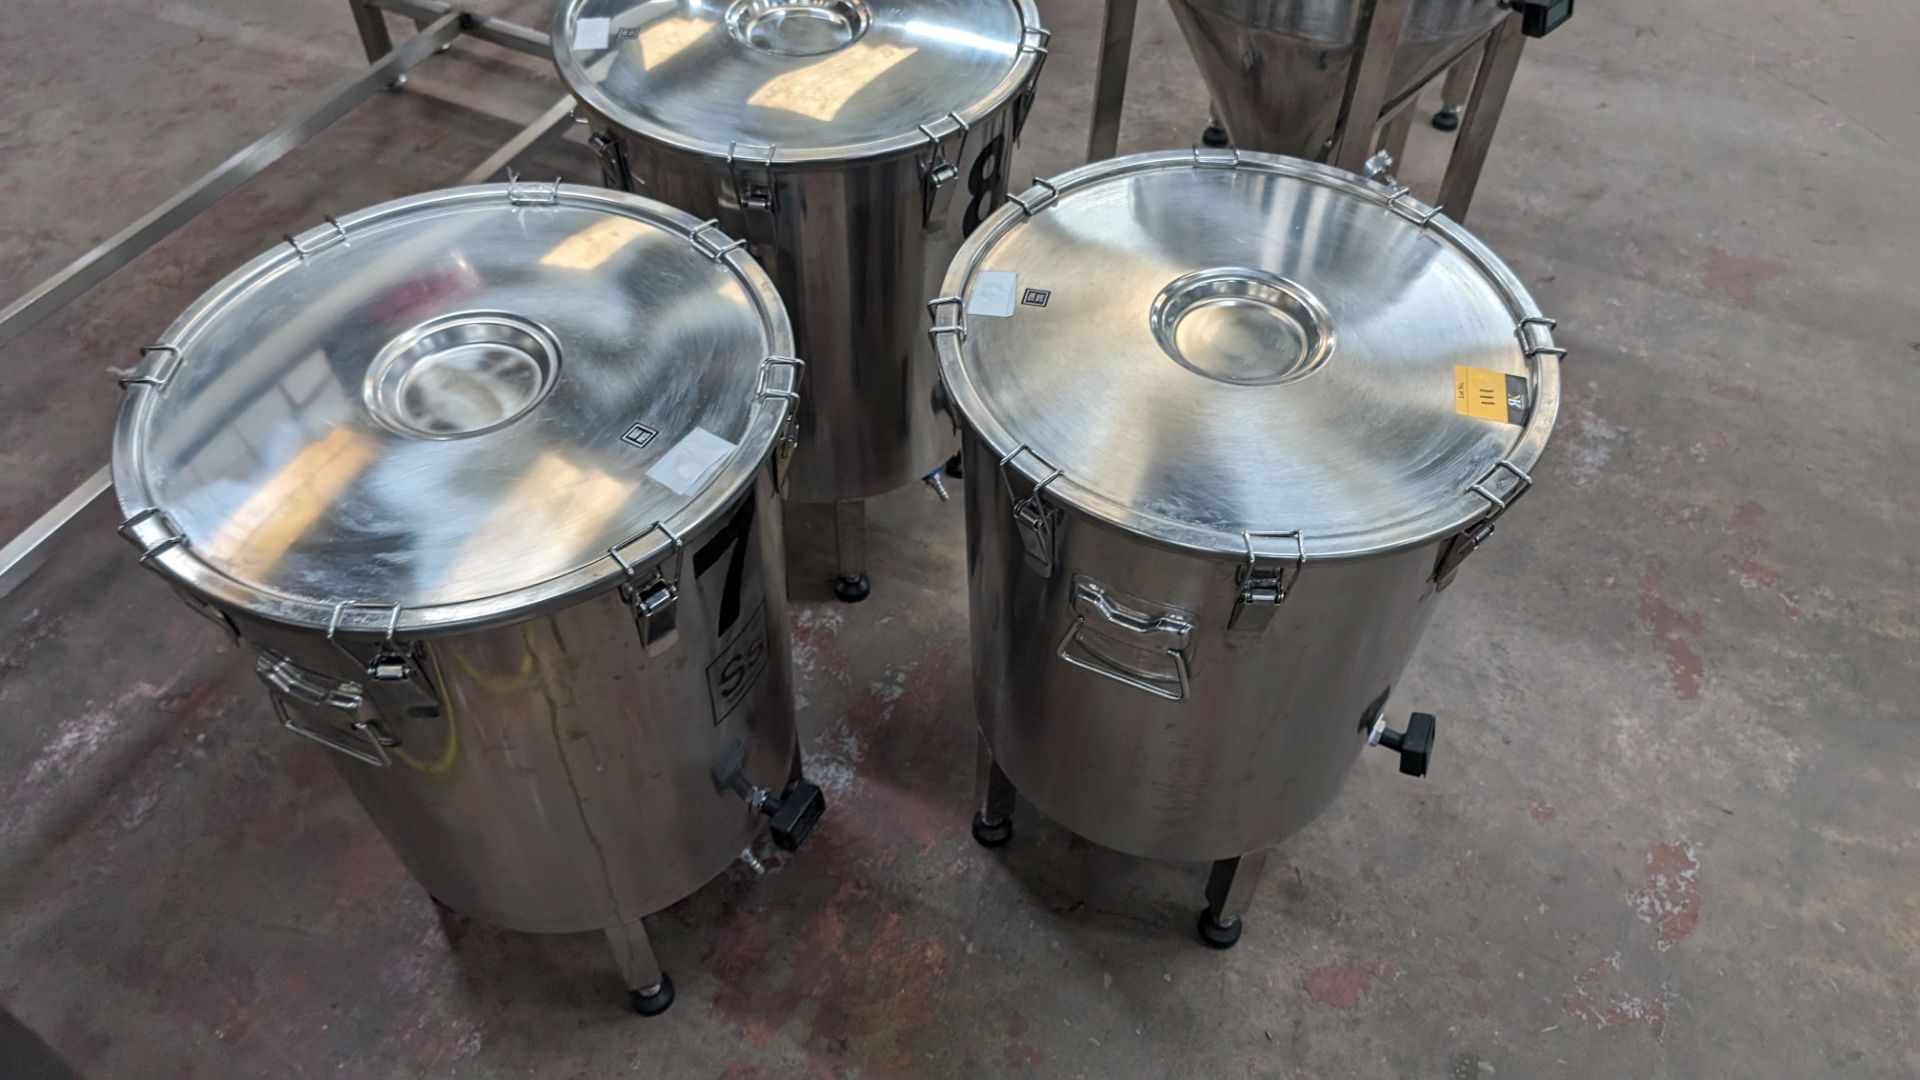 3 off SS Brewtech stainless steel static conical fermenters, each of which includes a digital displa - Image 8 of 9